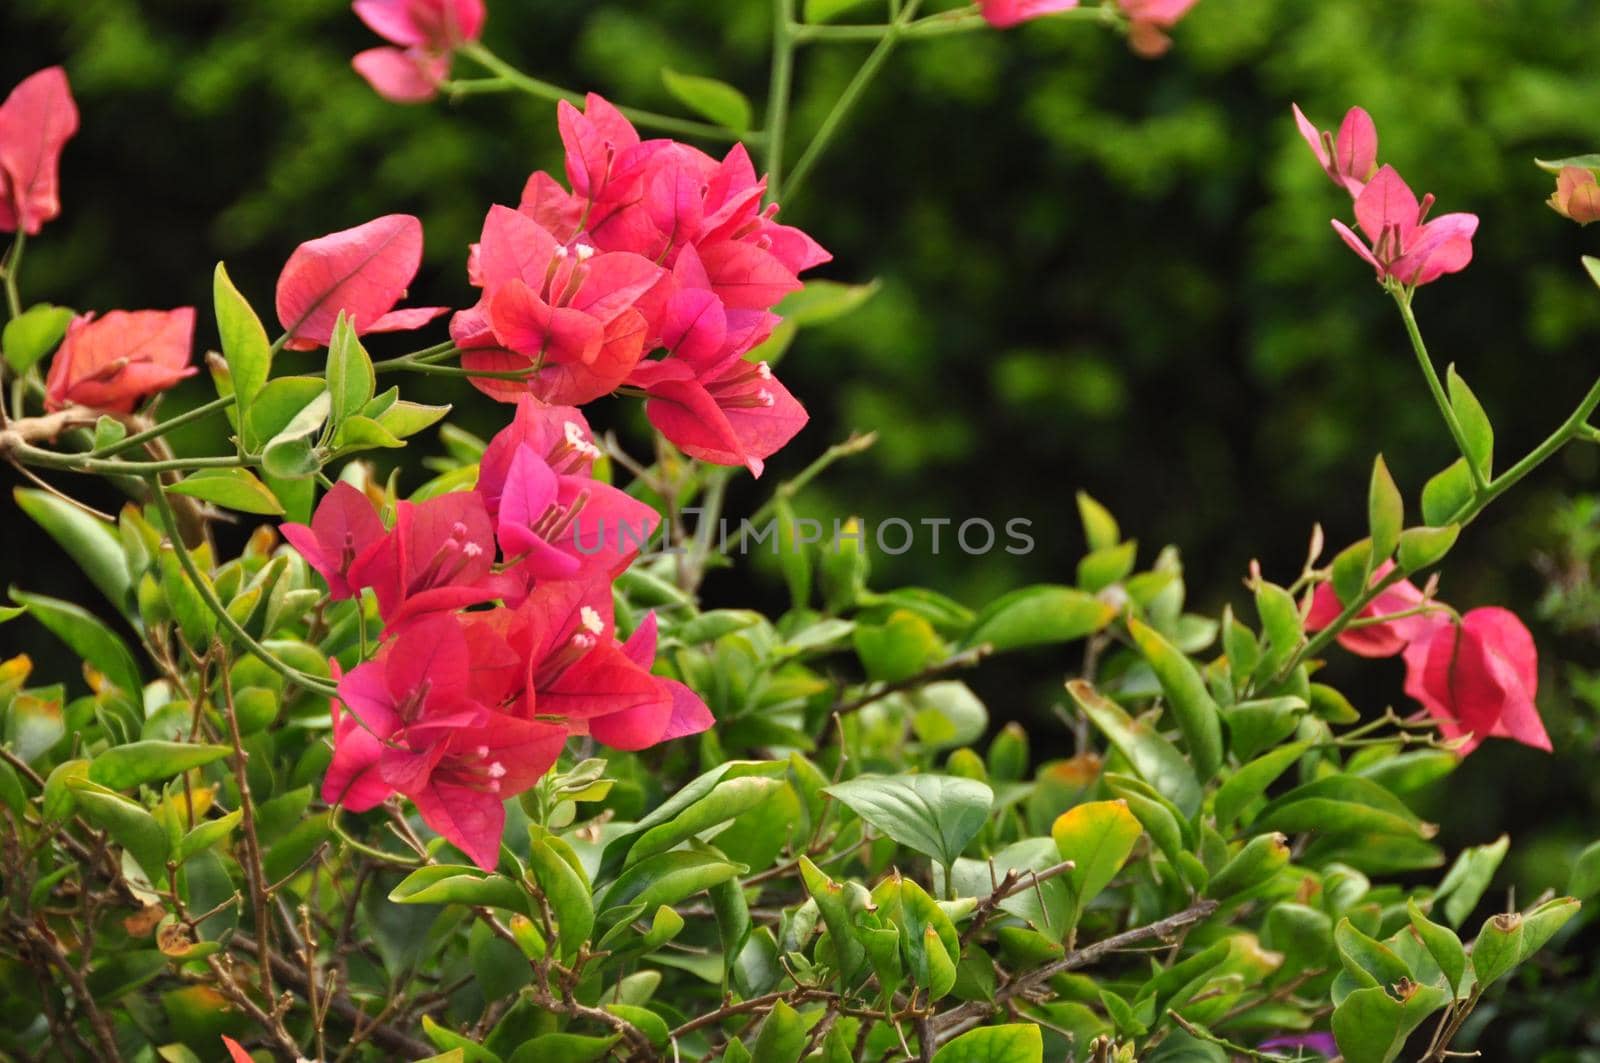 Green lush bush with bright pink flowers blooming in daylight. Beautiful tropical pink flowers on bush